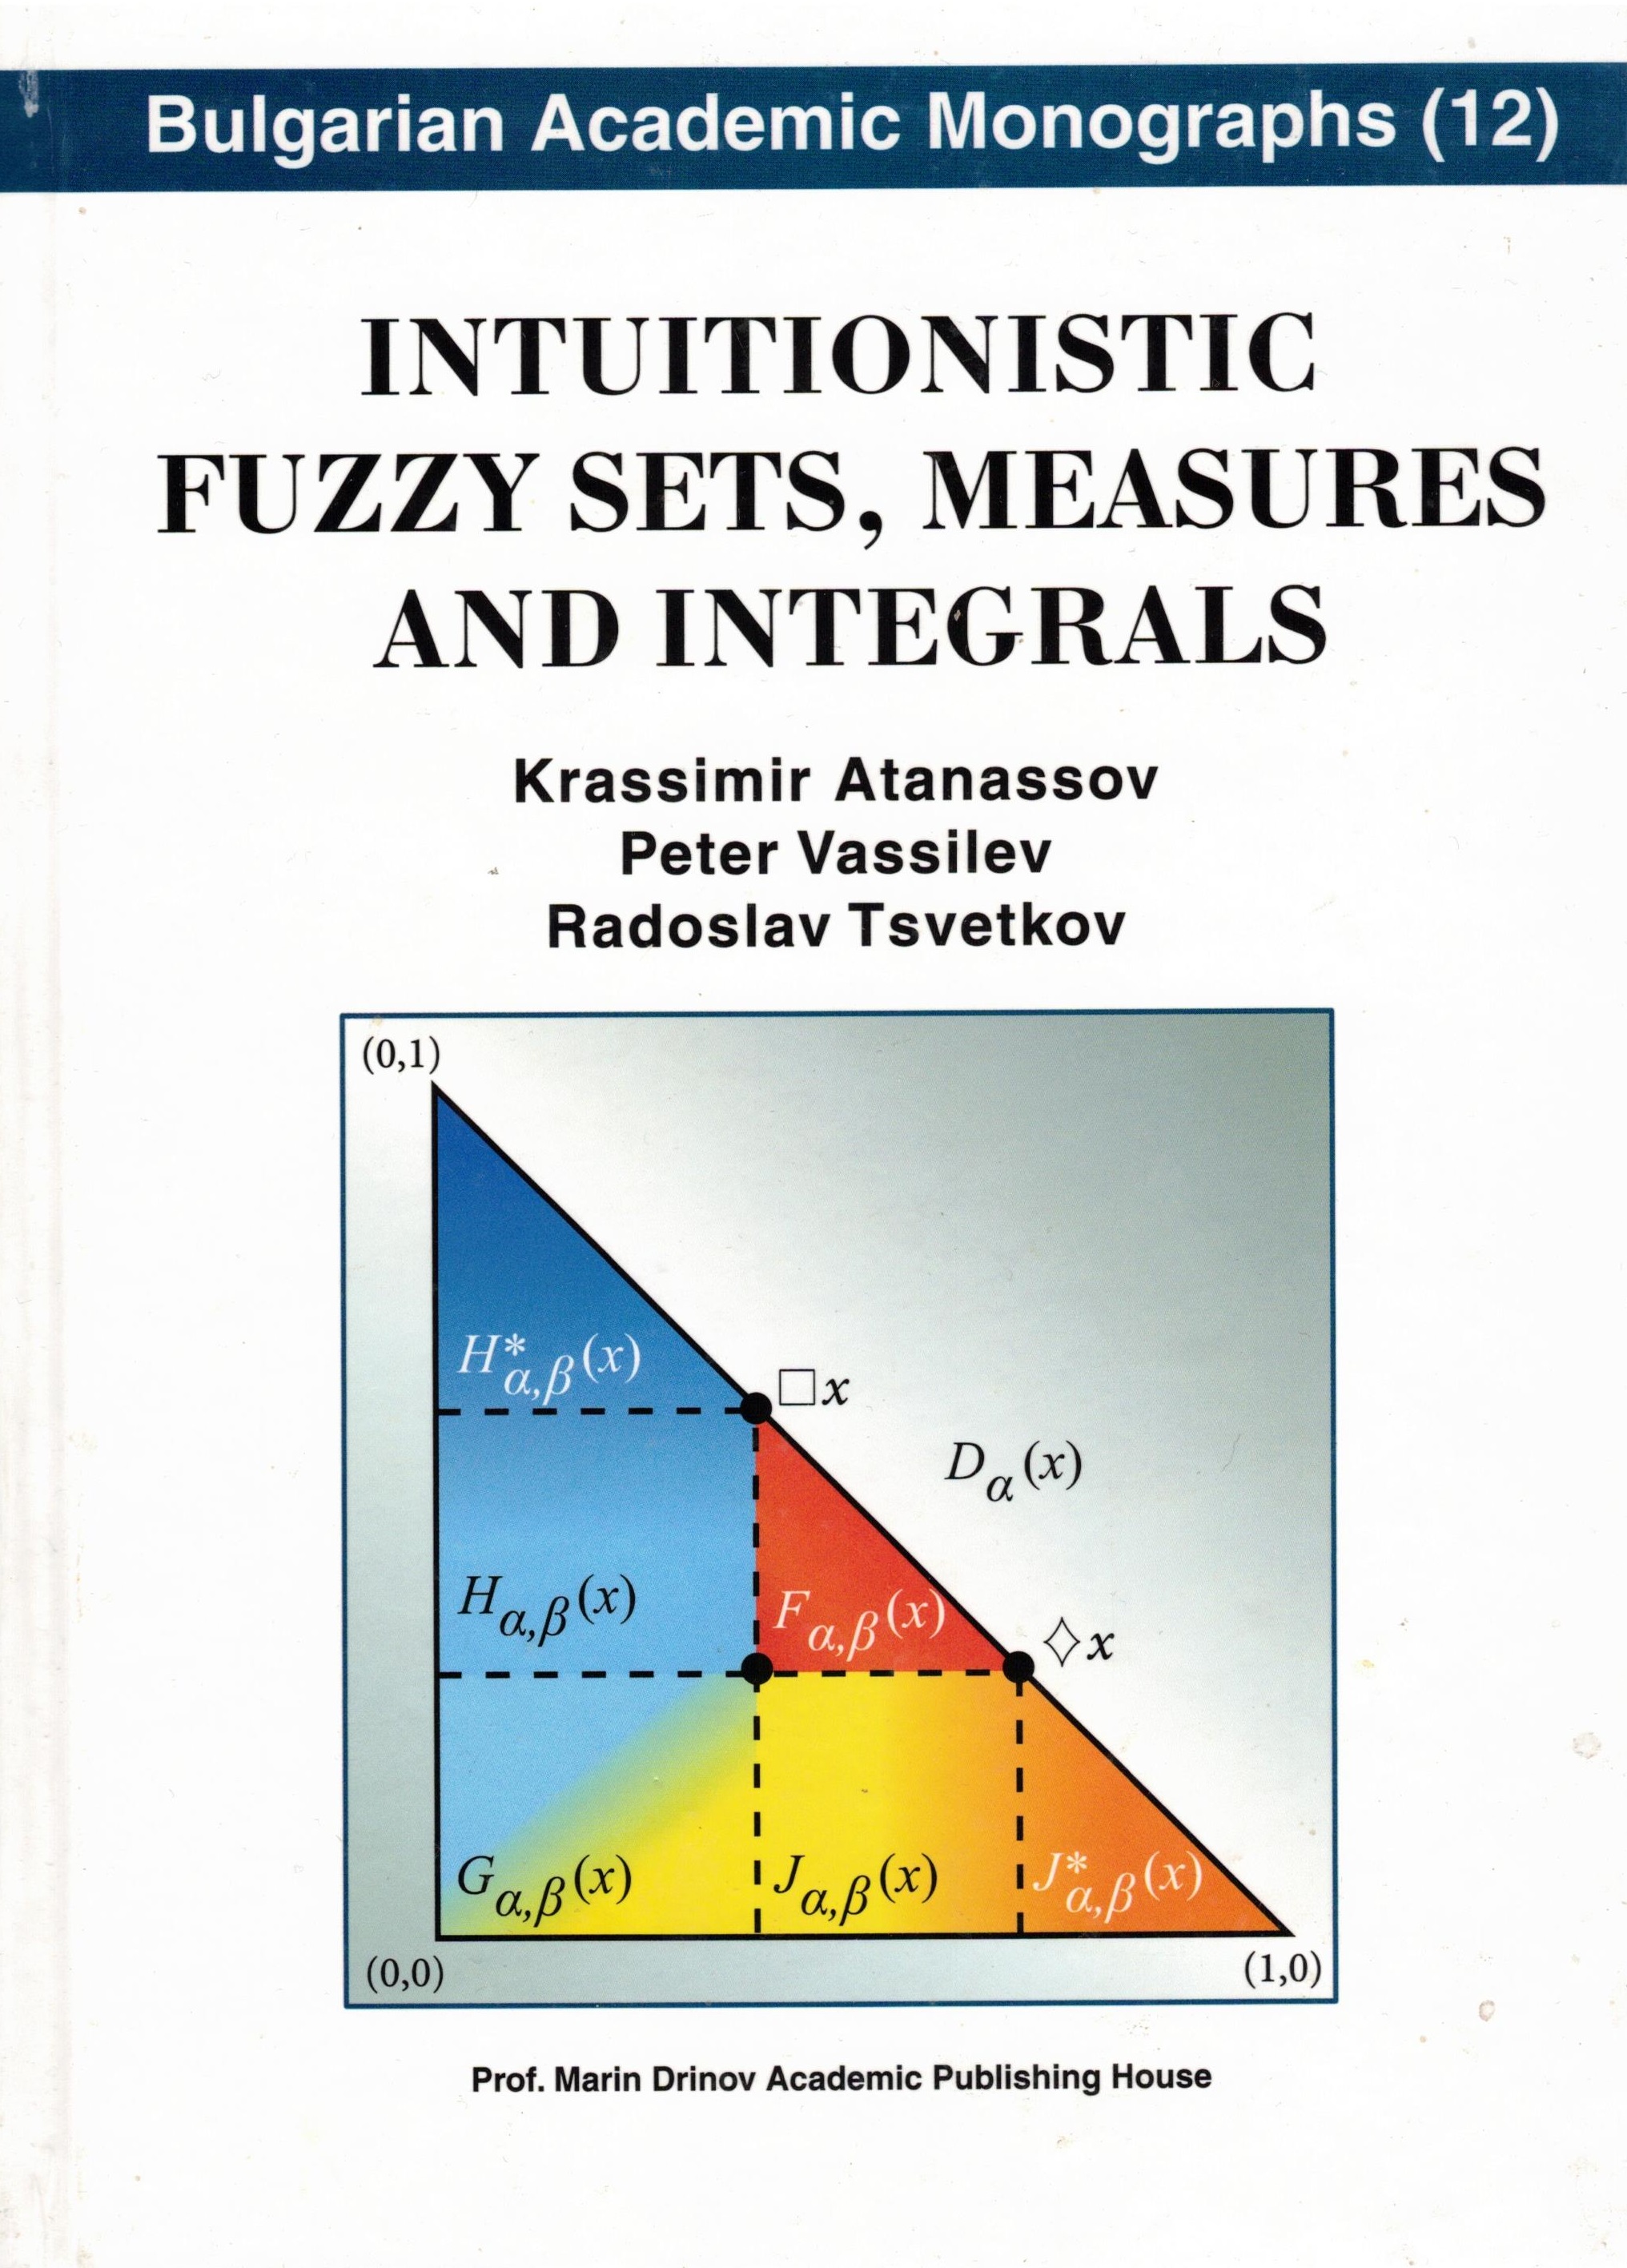 Intuitionistic Fuzzy Sets, Measures and Integrals